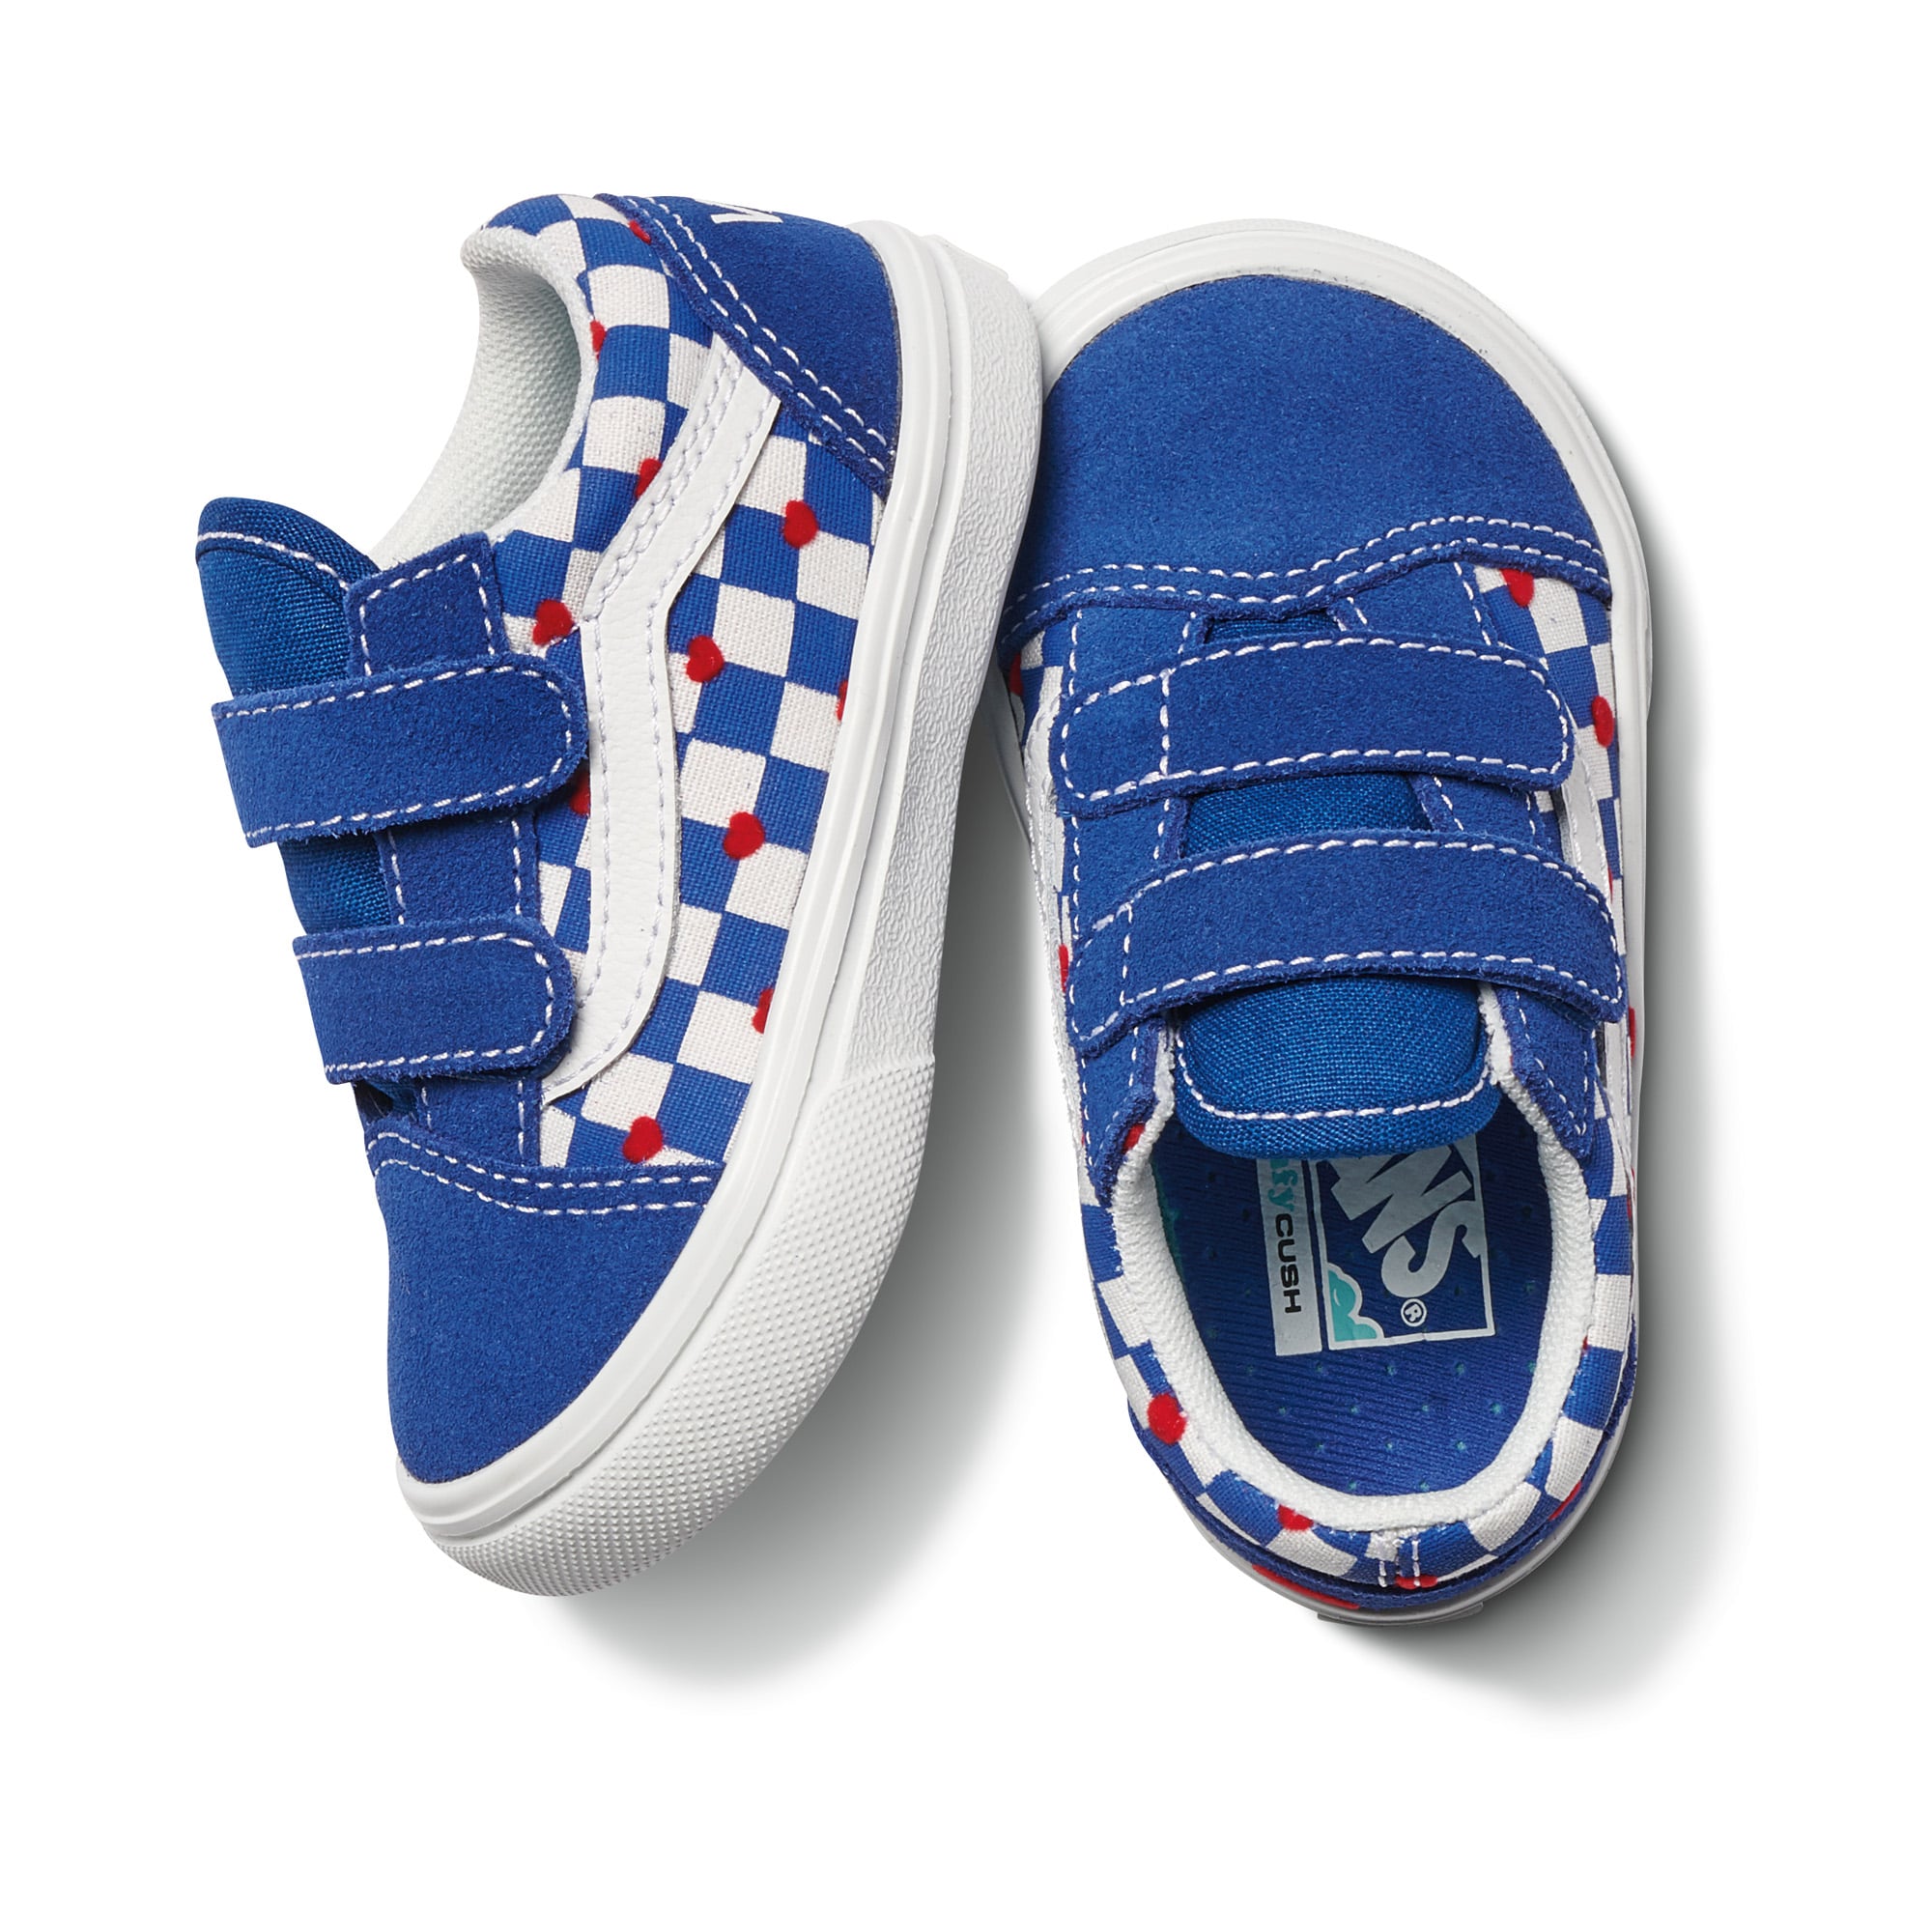 Vans releases new Autism Awareness Collection designed with